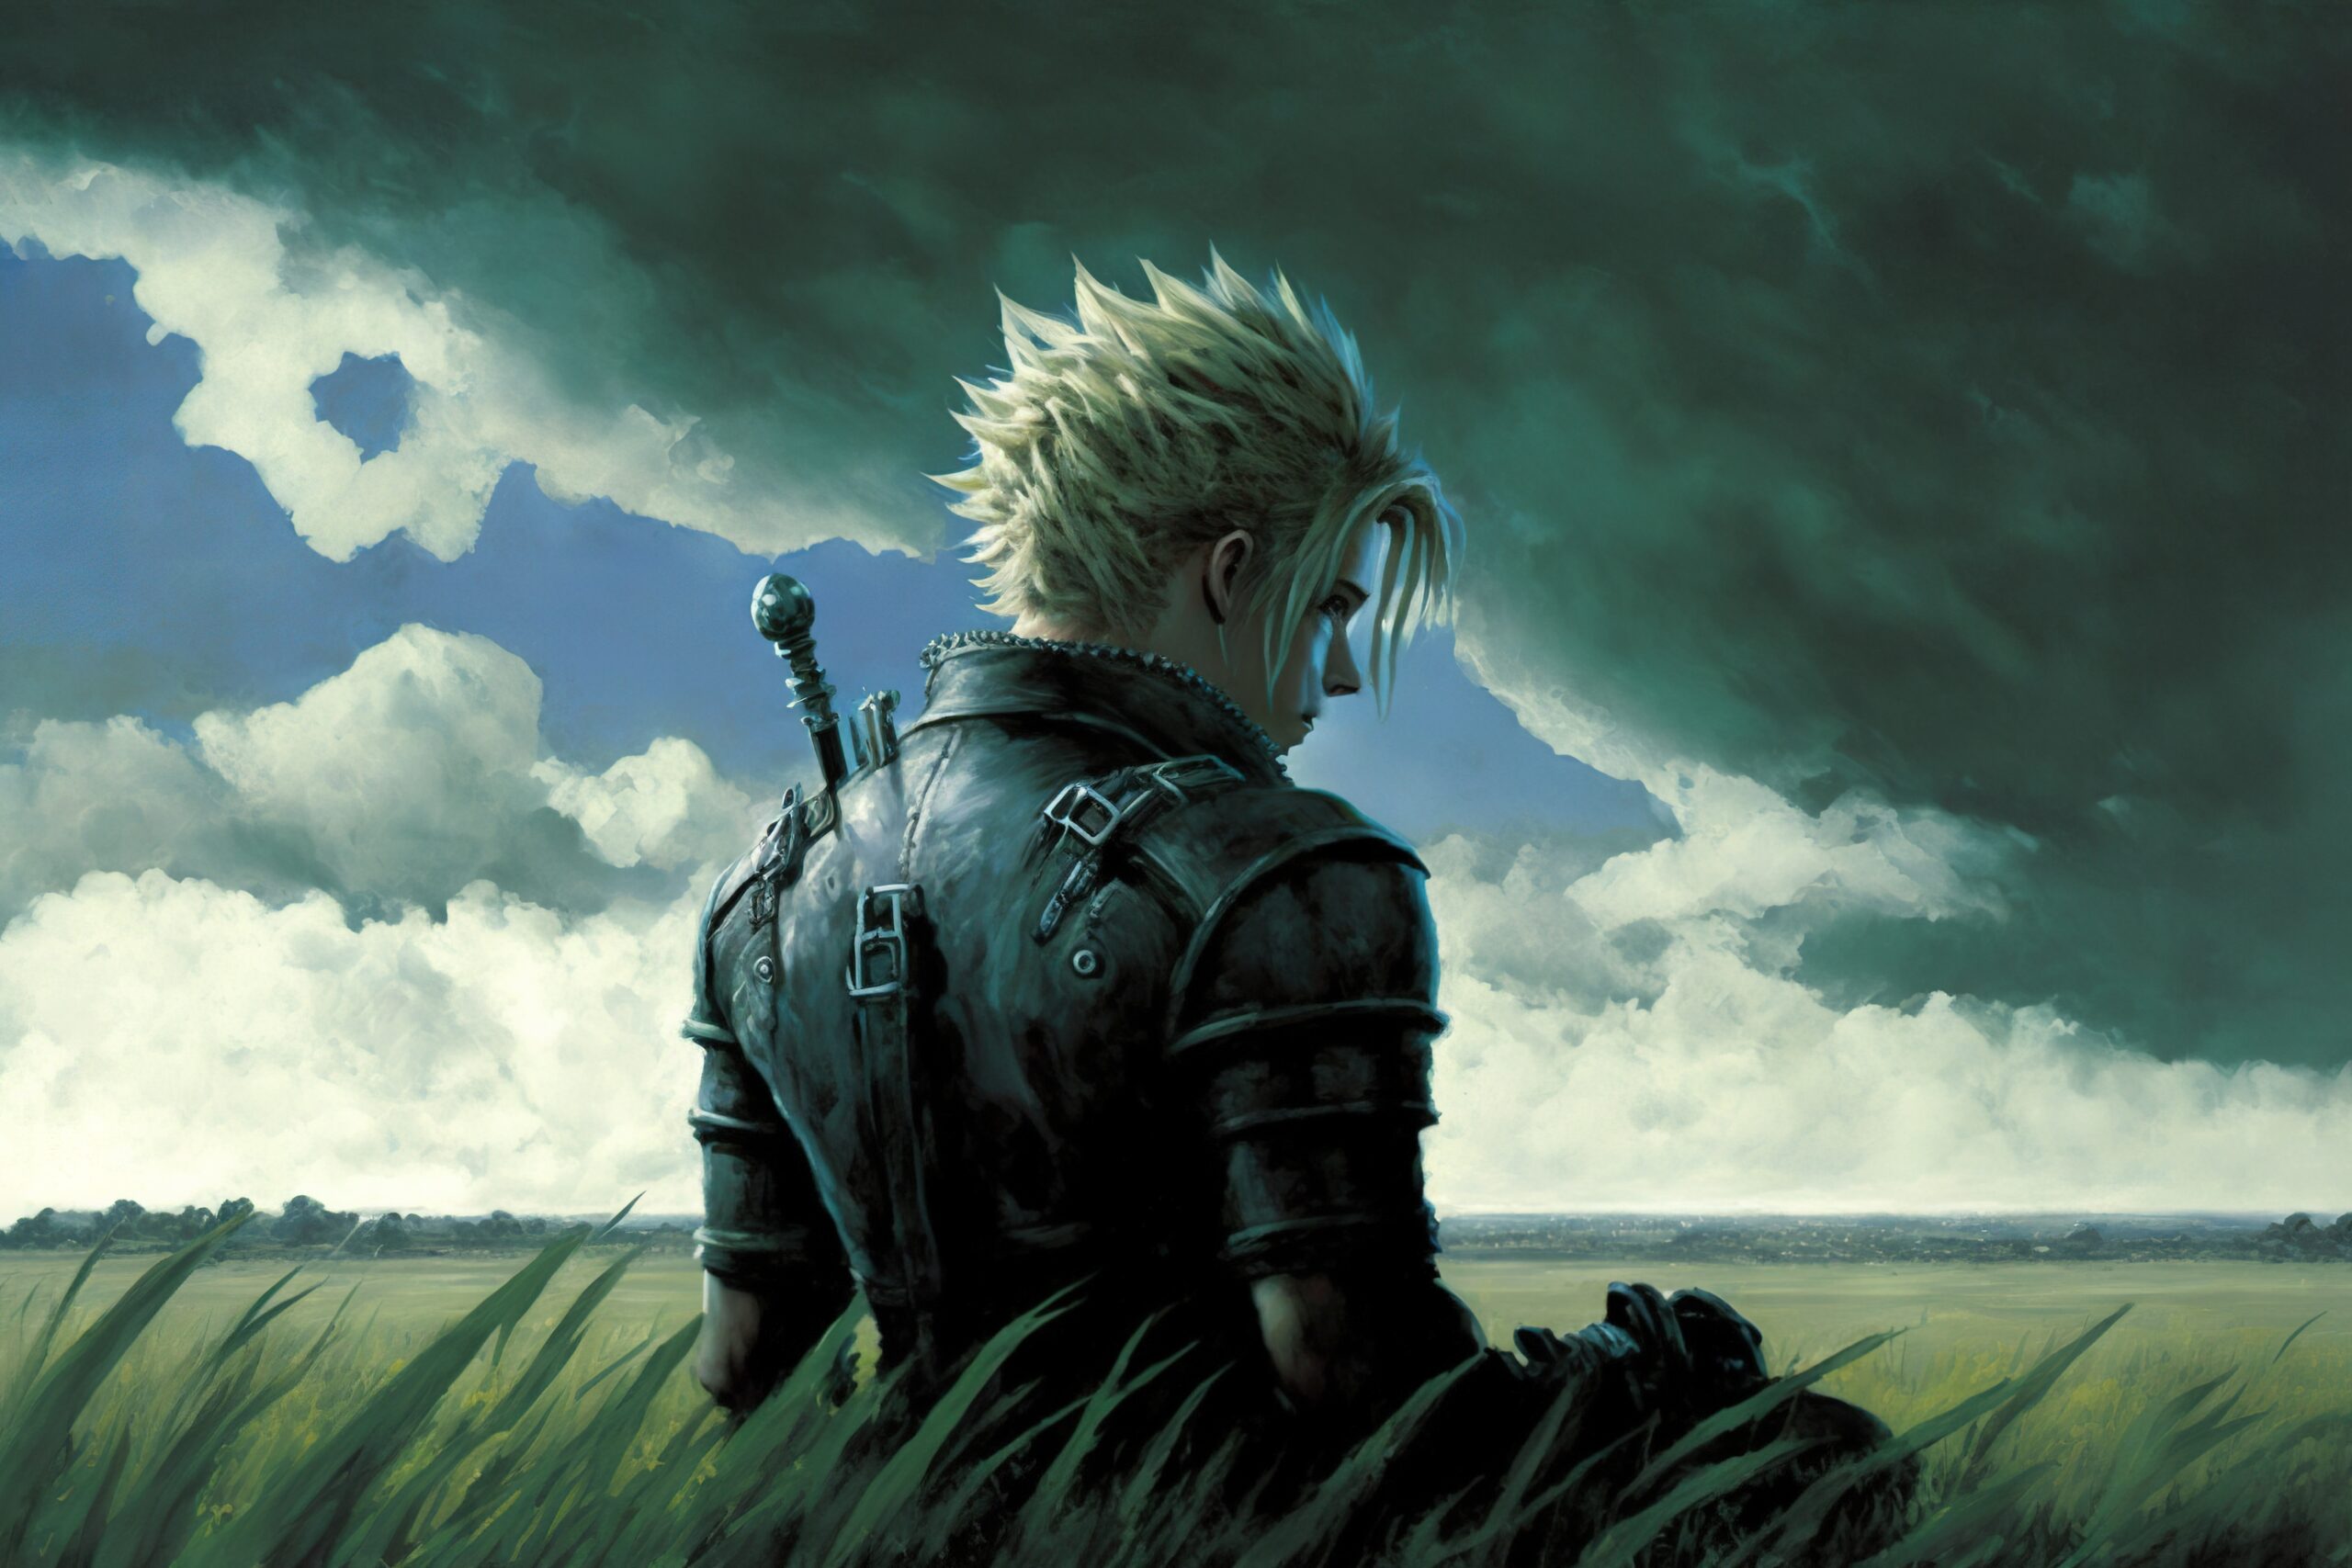 An anime fantasy warrior sitting on a green field with a cloudy sky